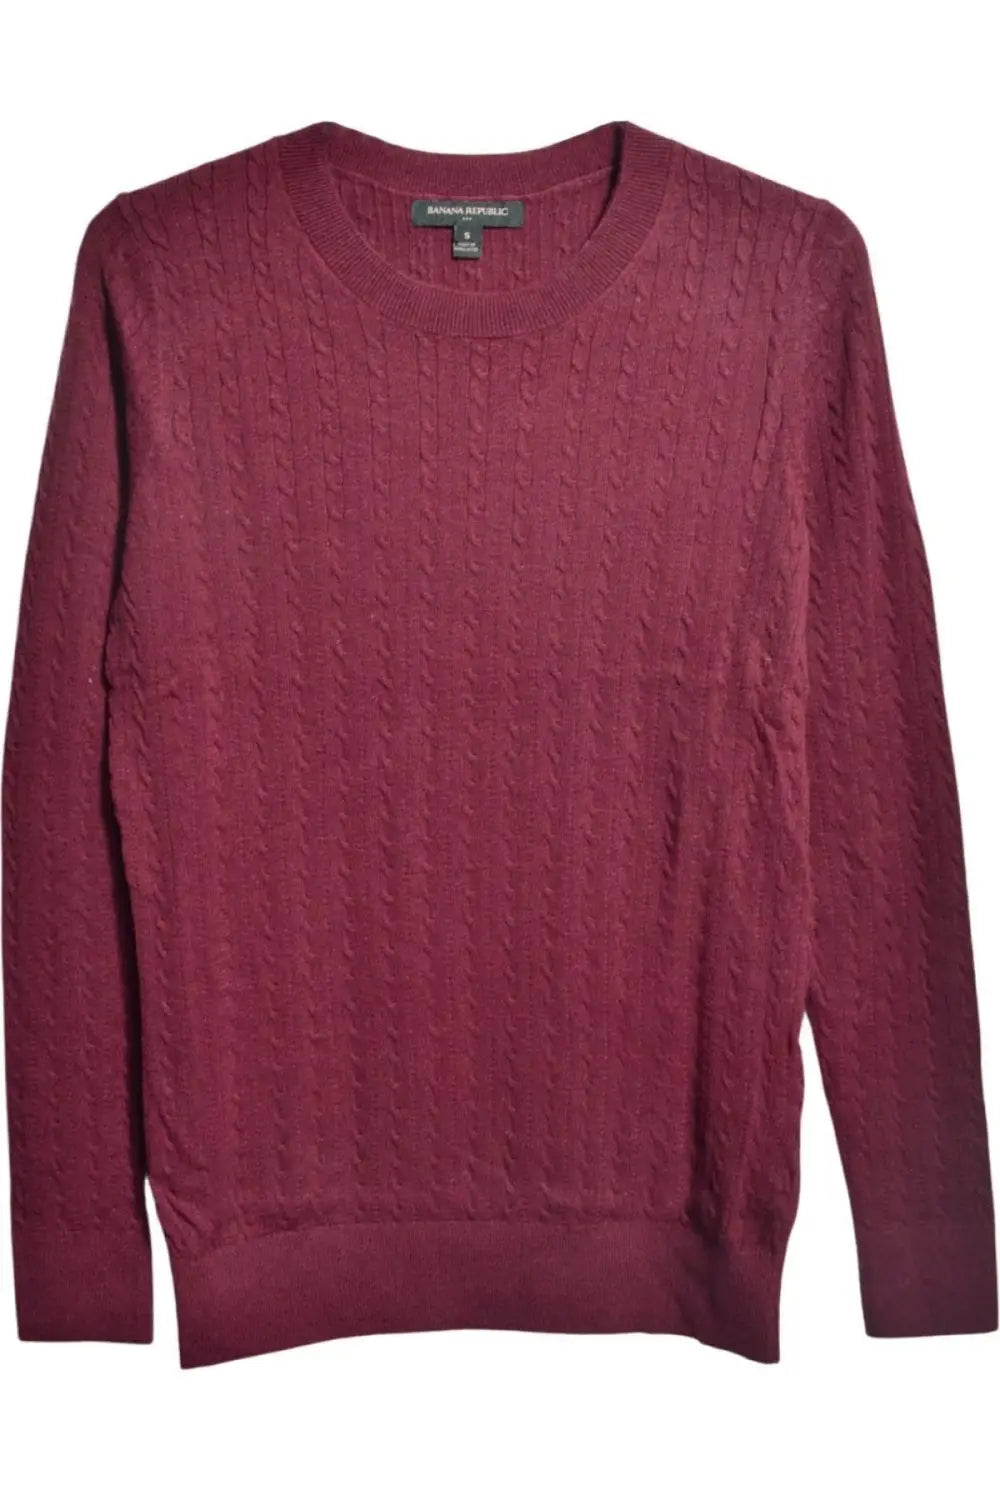 Banana Republic Cable Knit Round Neck Jumper